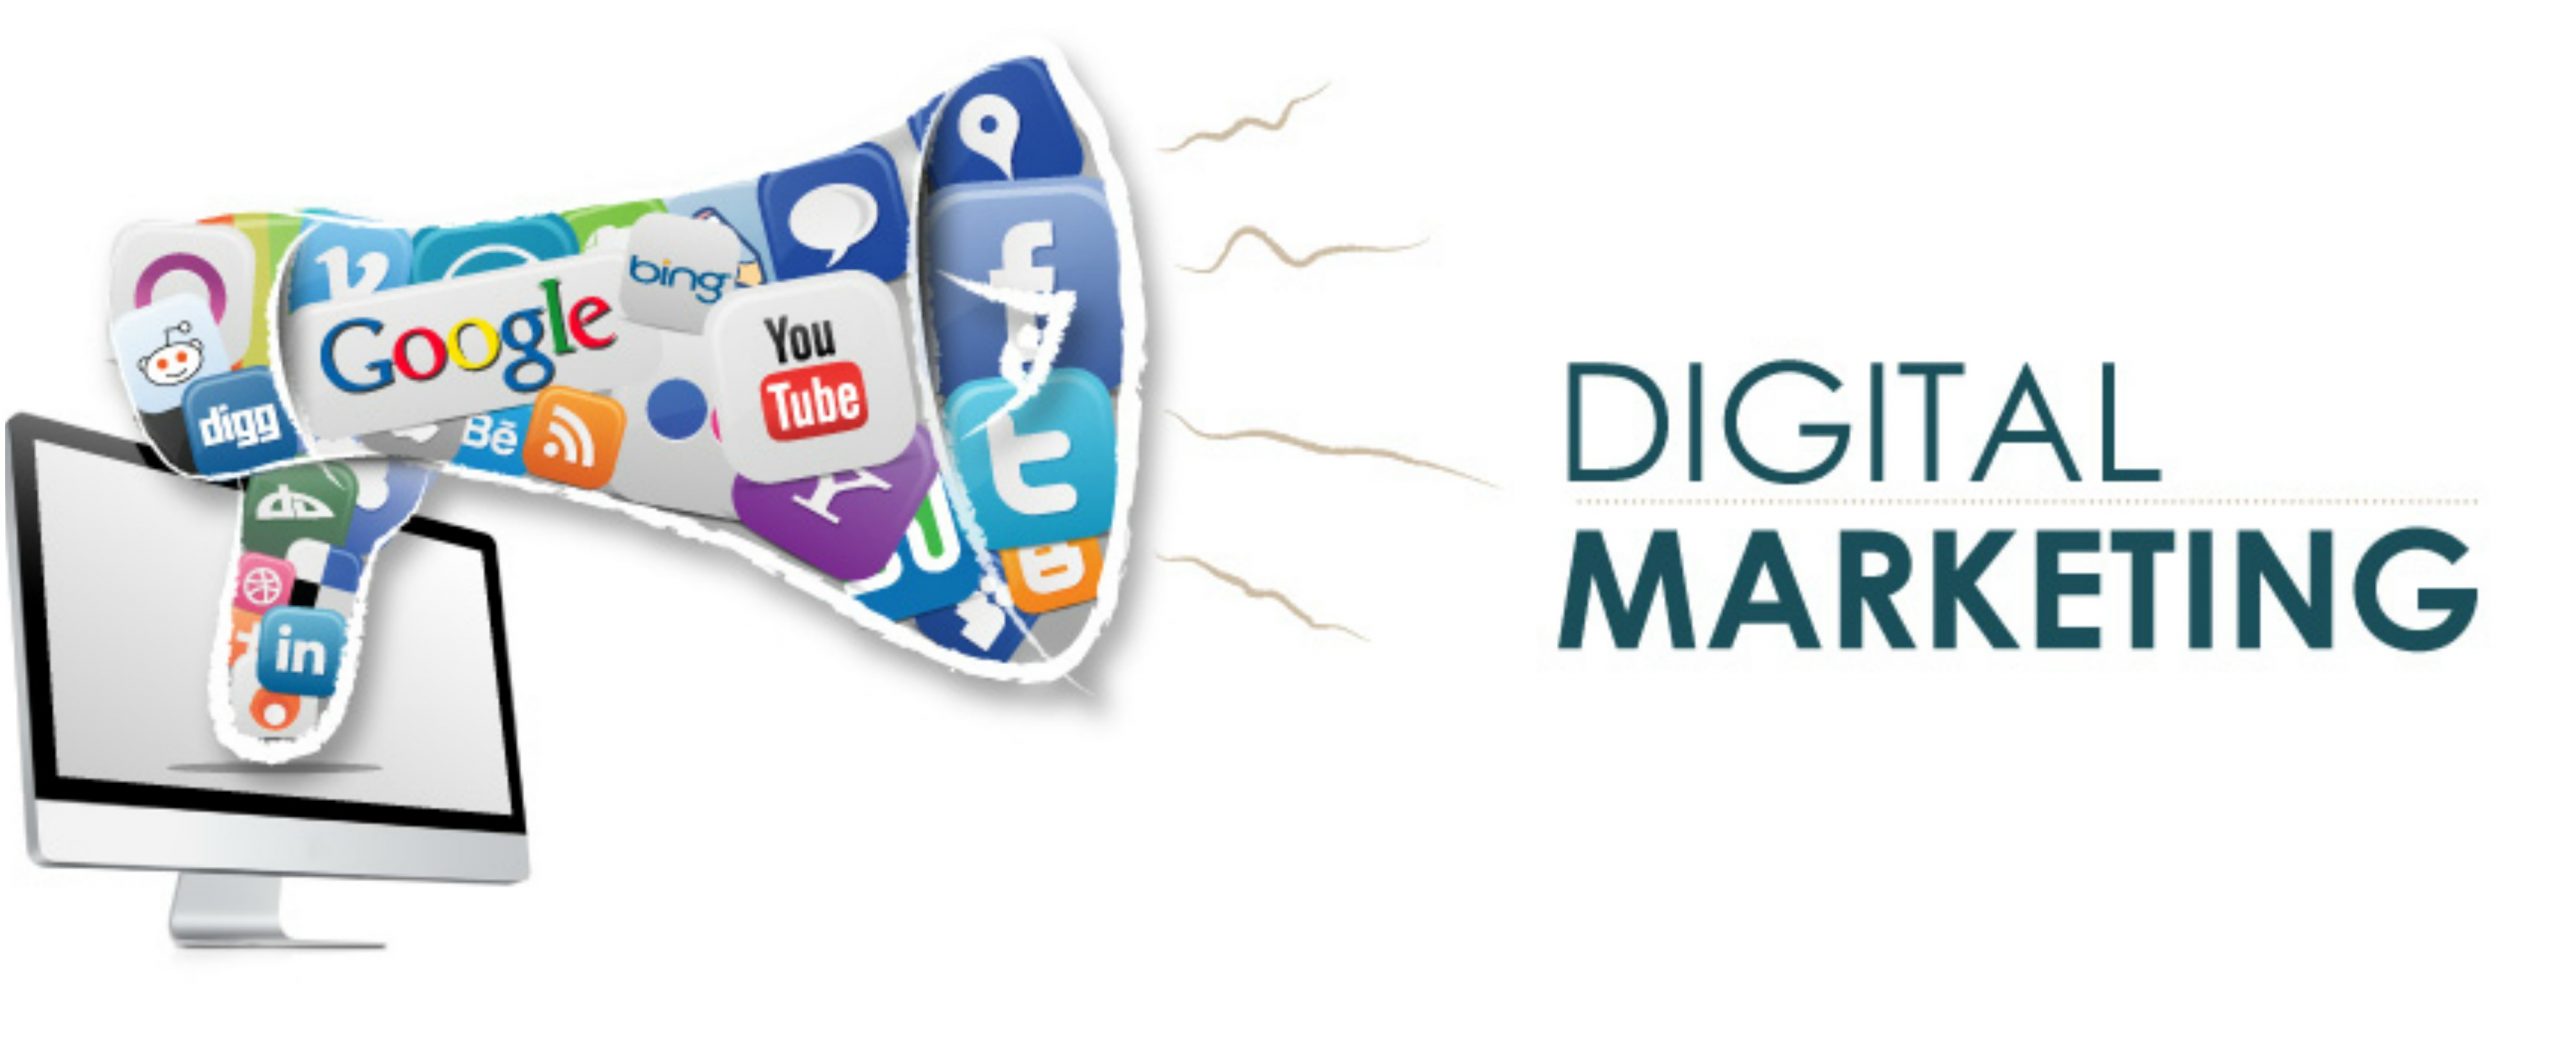 How to Build Your Business with the Best Digital Marketing Agencies?